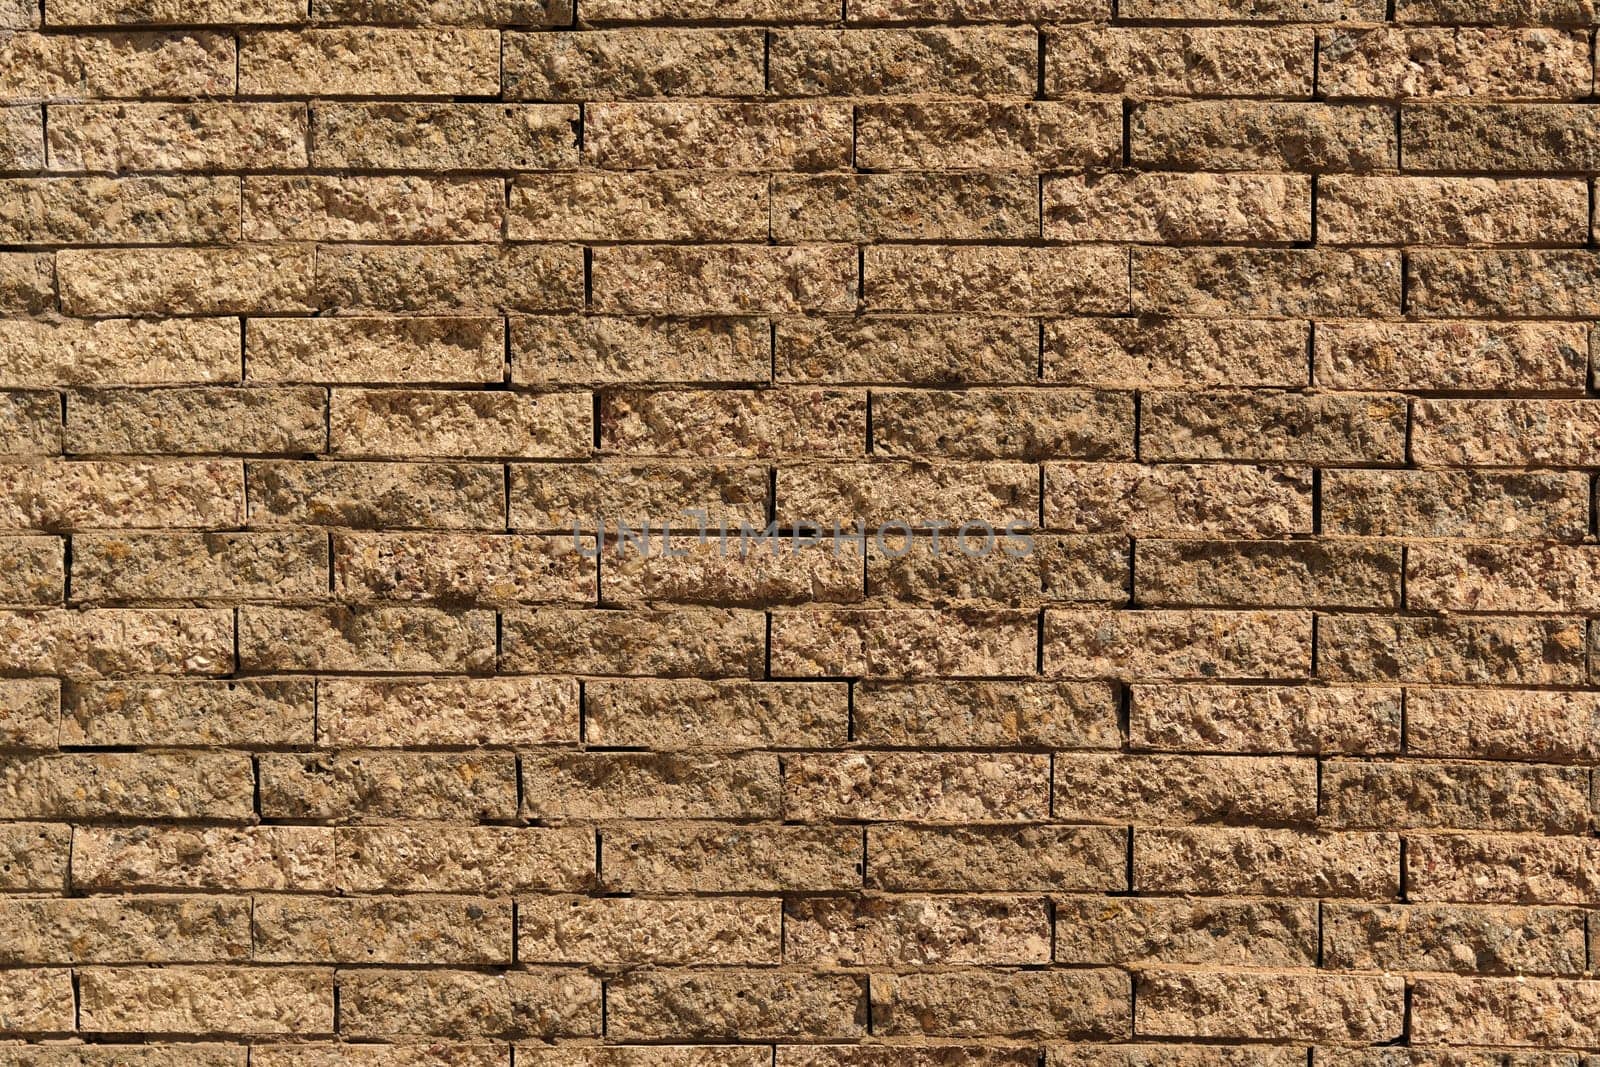 Close-up view of a textured brick wall, showcasing the intricate patterns and details of individual stones creating an abstract composition.